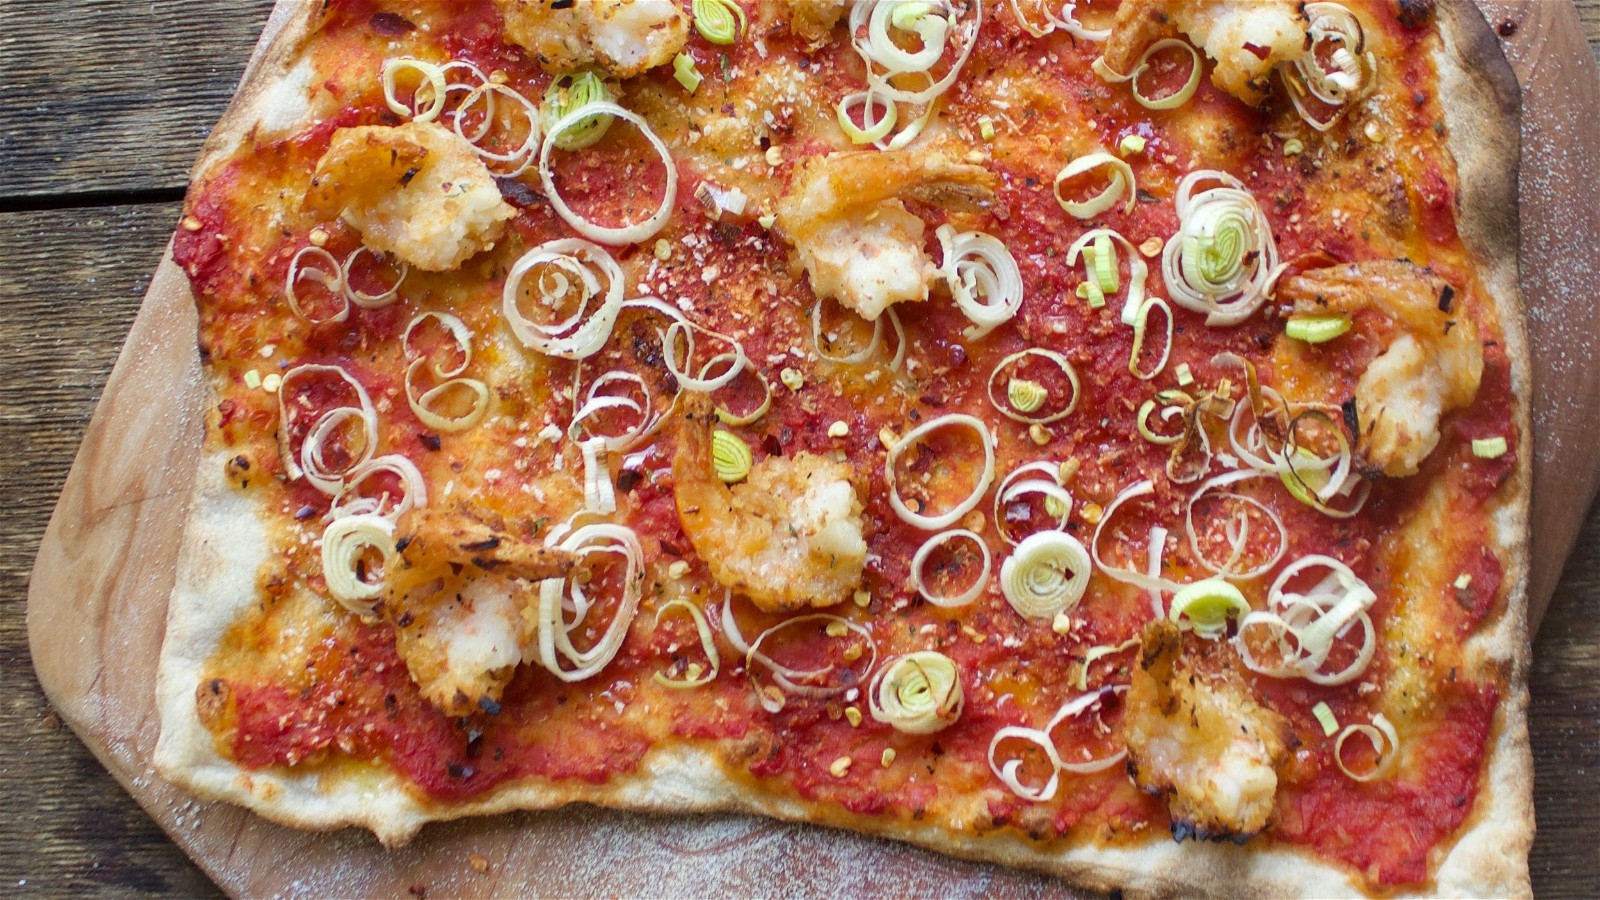 Image of Spicy Coconut Shrimp Pizza